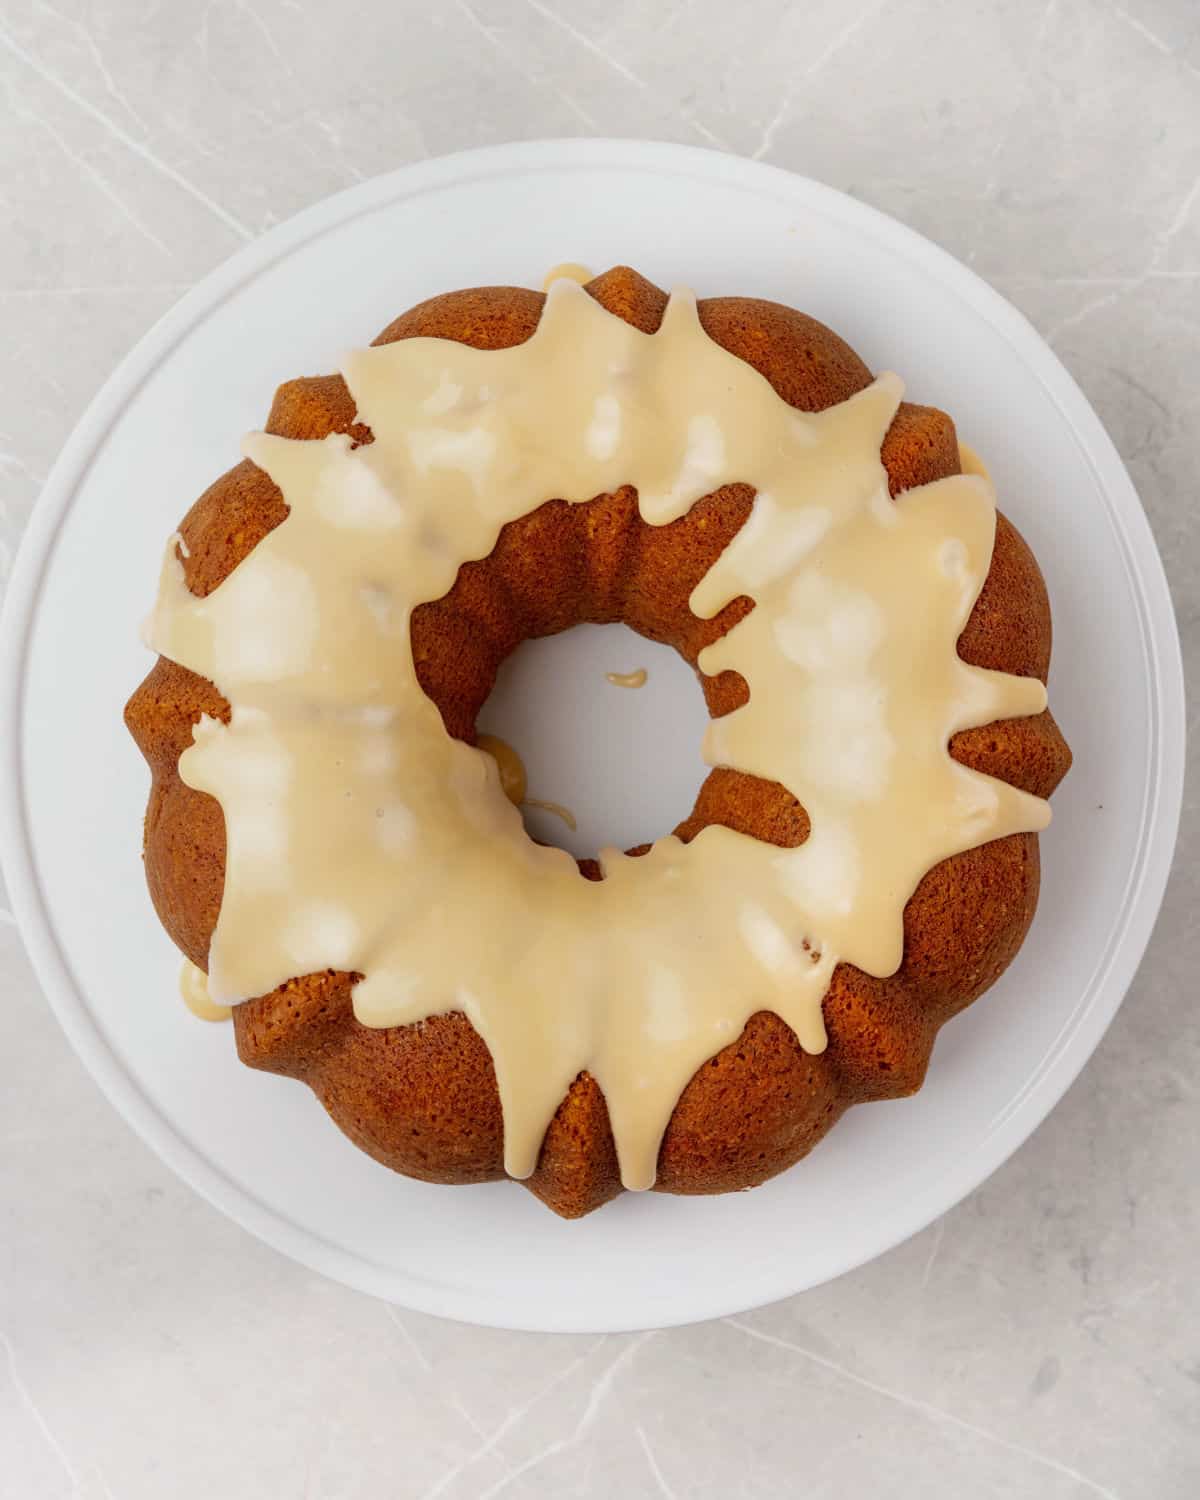 Iced maple walnut bundt cake on a white plate on a grey surface. Top view.